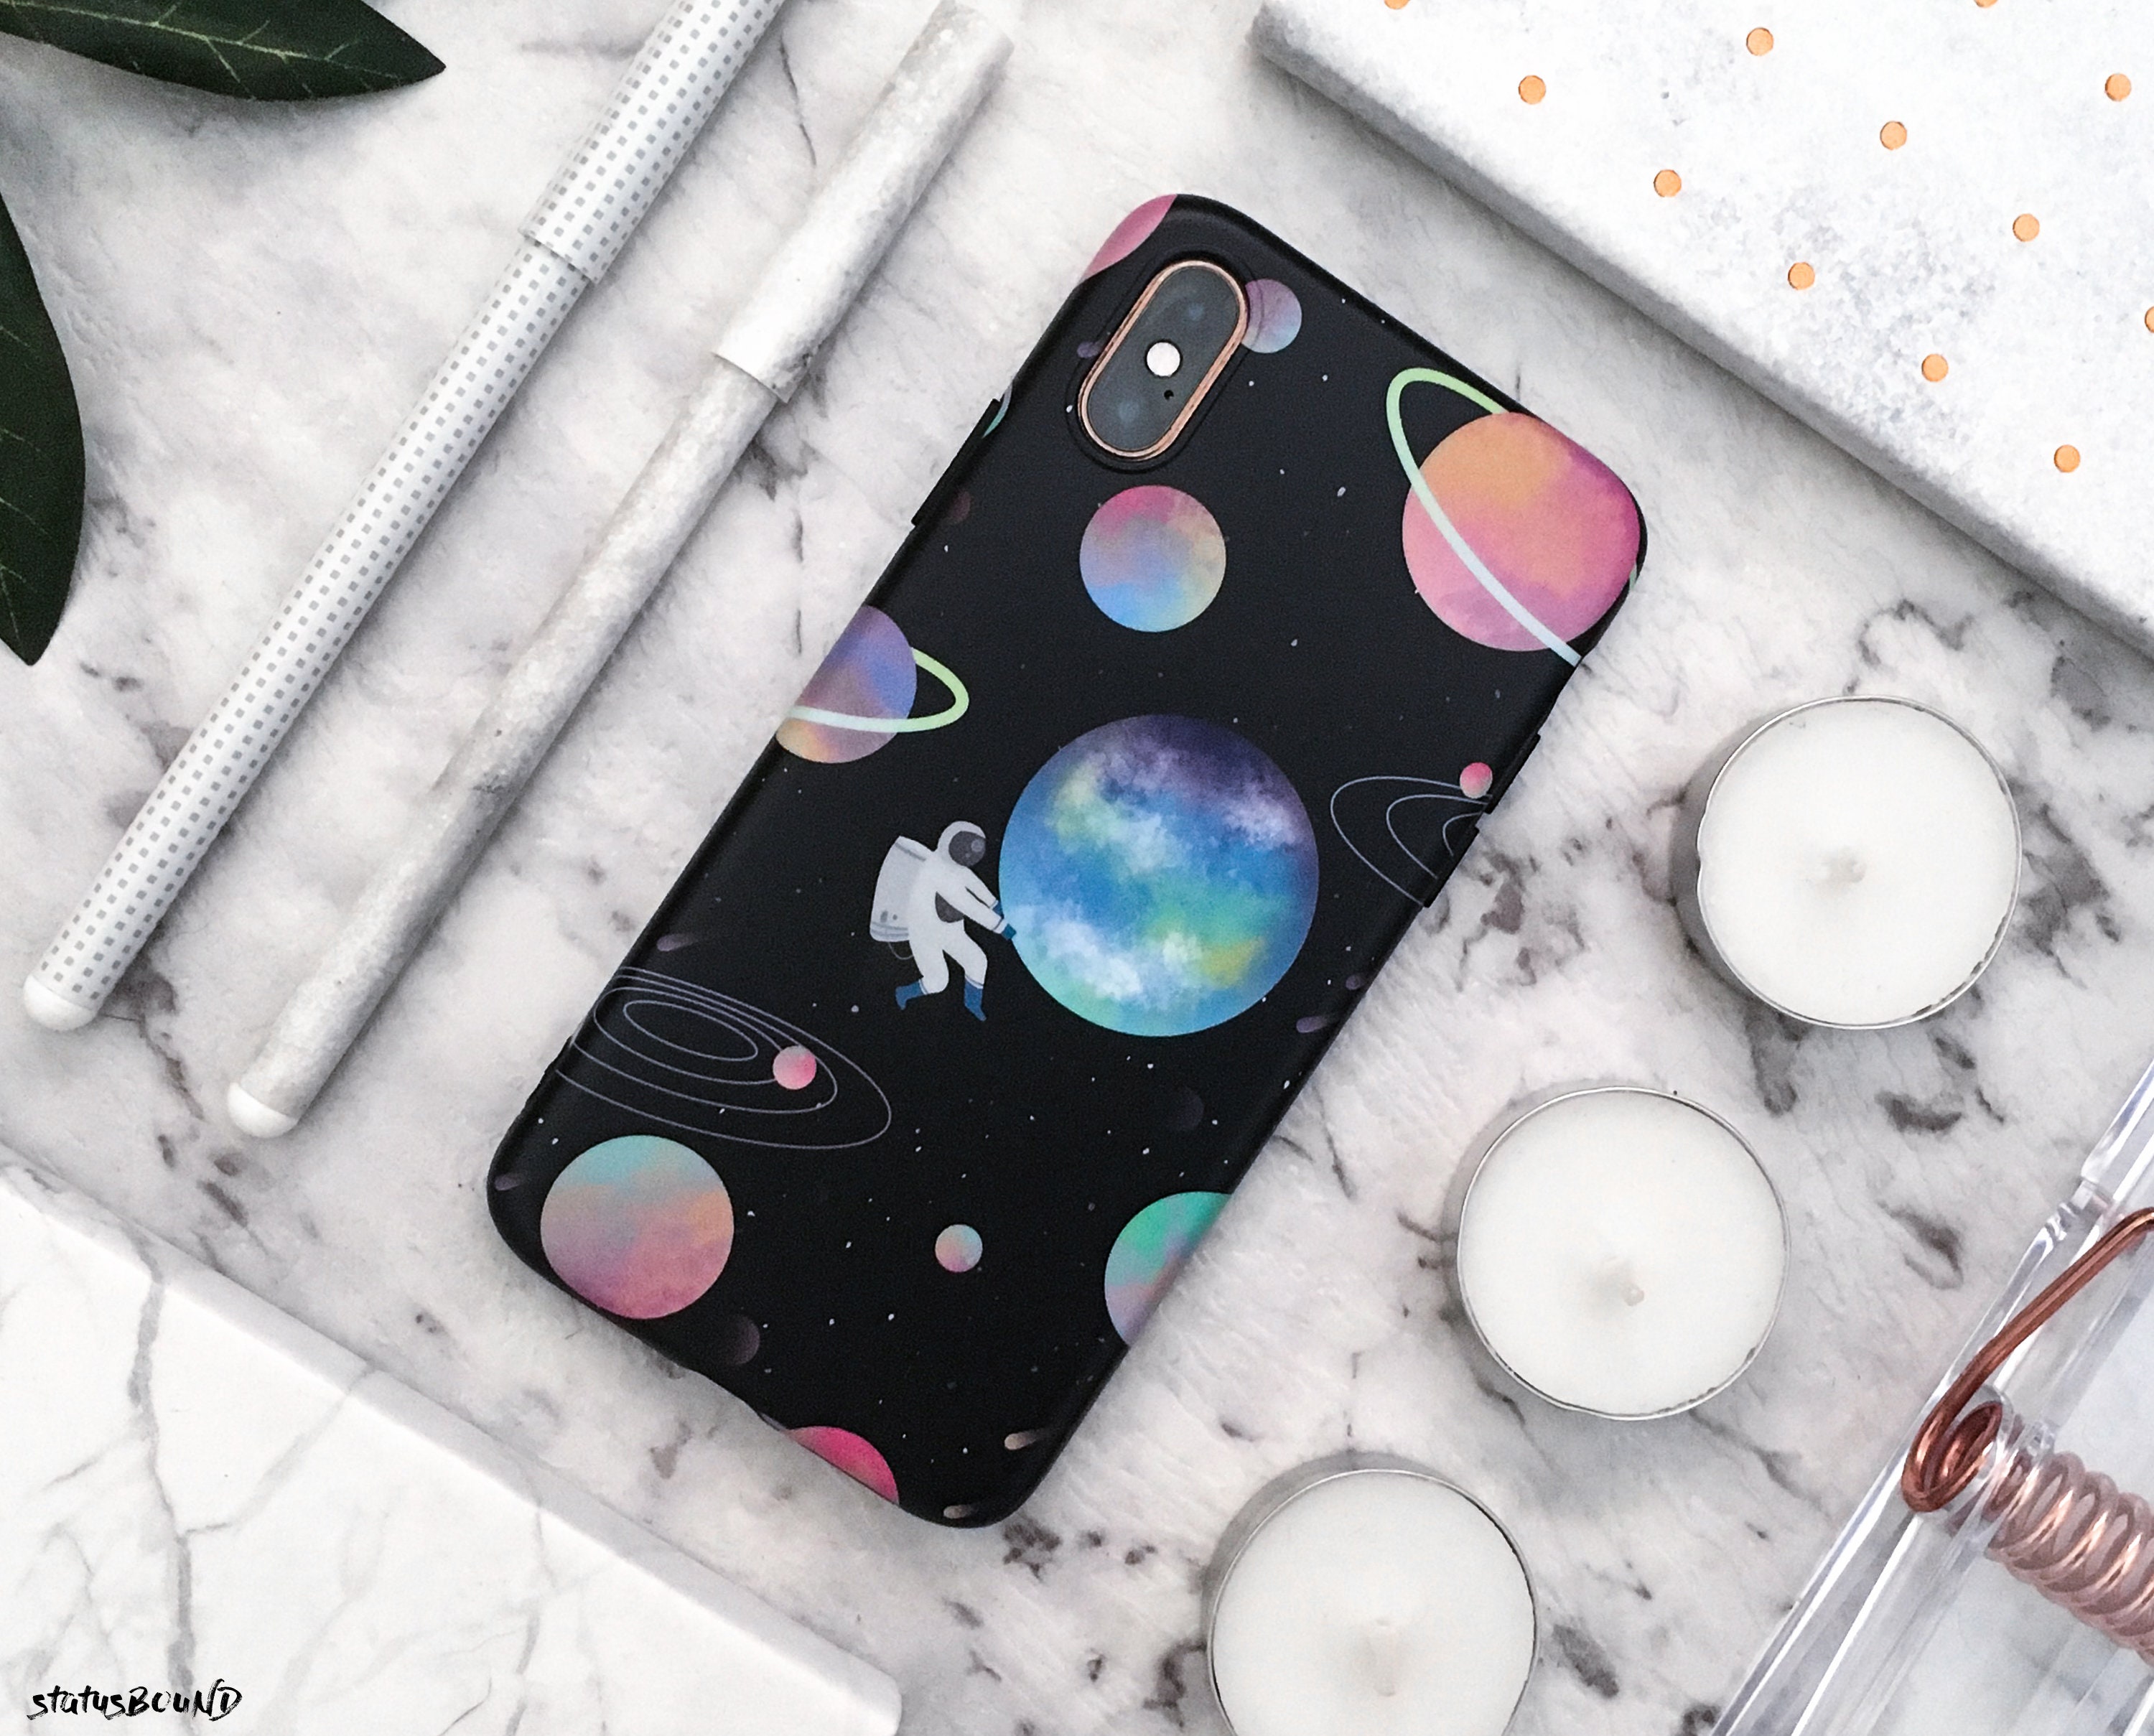 Planets Space iPhone 11 Pro Max case iPhone XR case iPhone XS Max Apple Case iPhone X Case iPhone 7 Plus iPhone 8 Plus case iPhone 6 cas o72